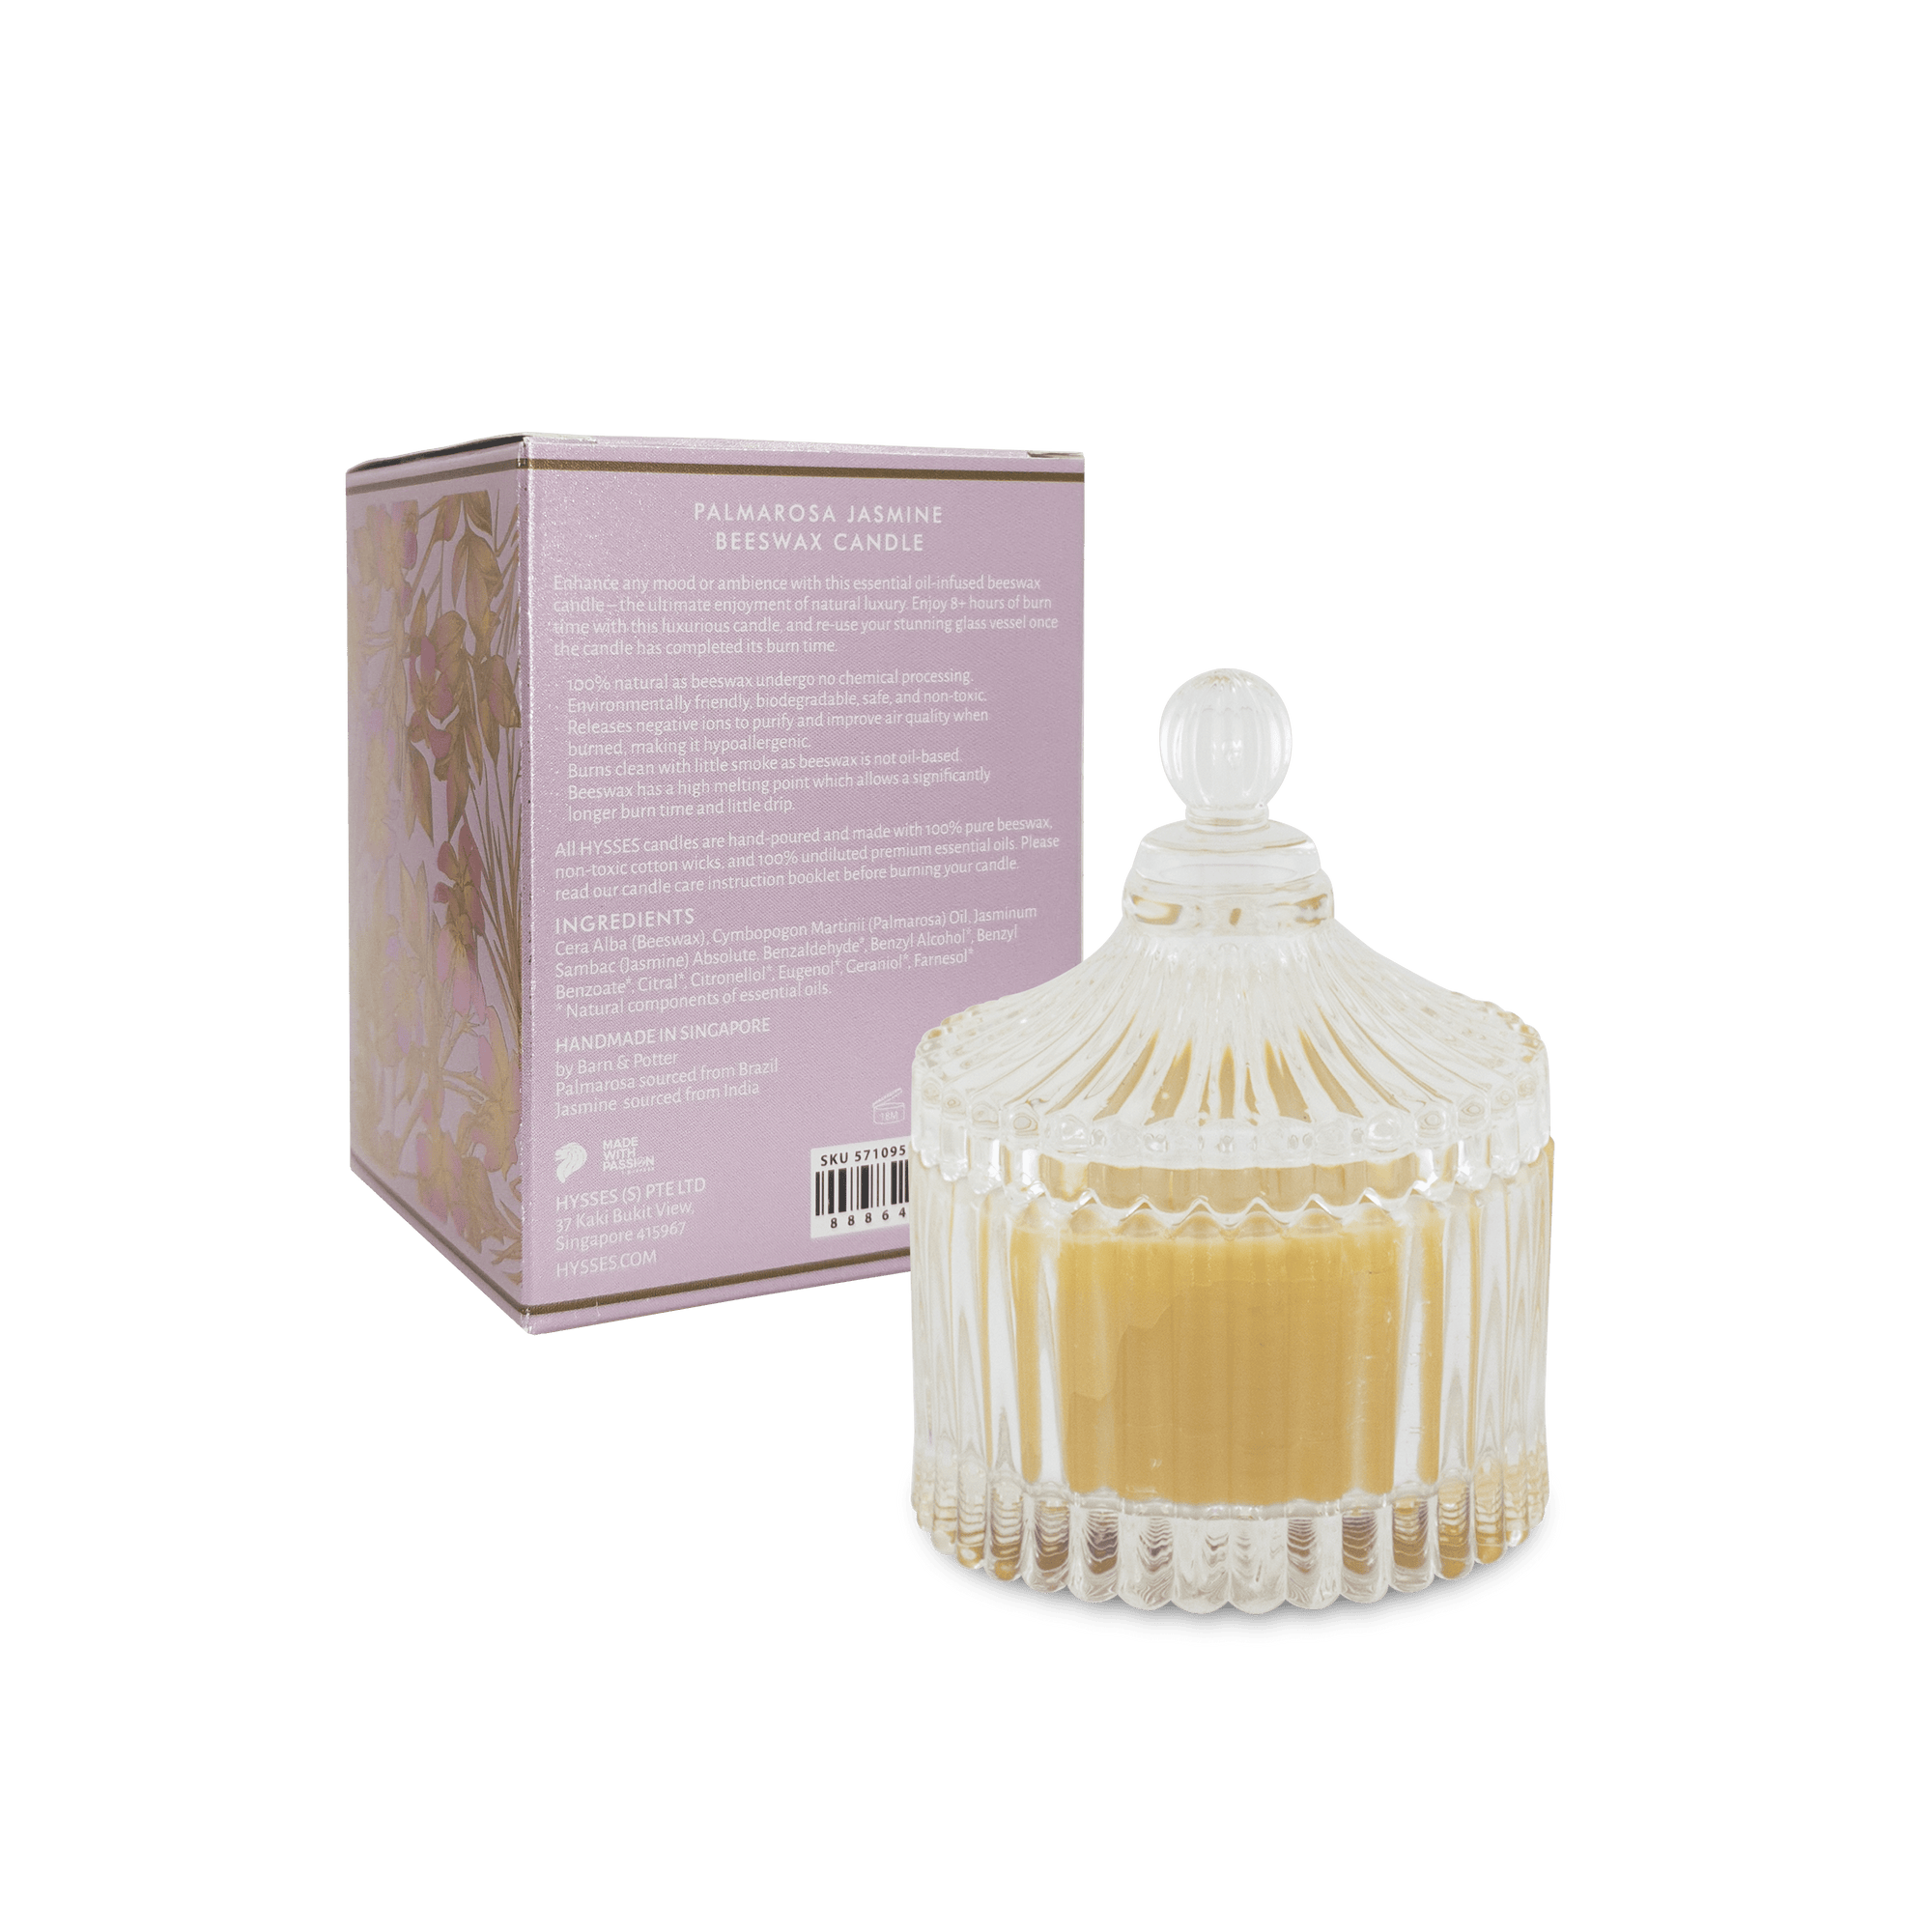 Hysses Home Scents 100g Beeswax Candle Palmarosa Jasmine, 100g